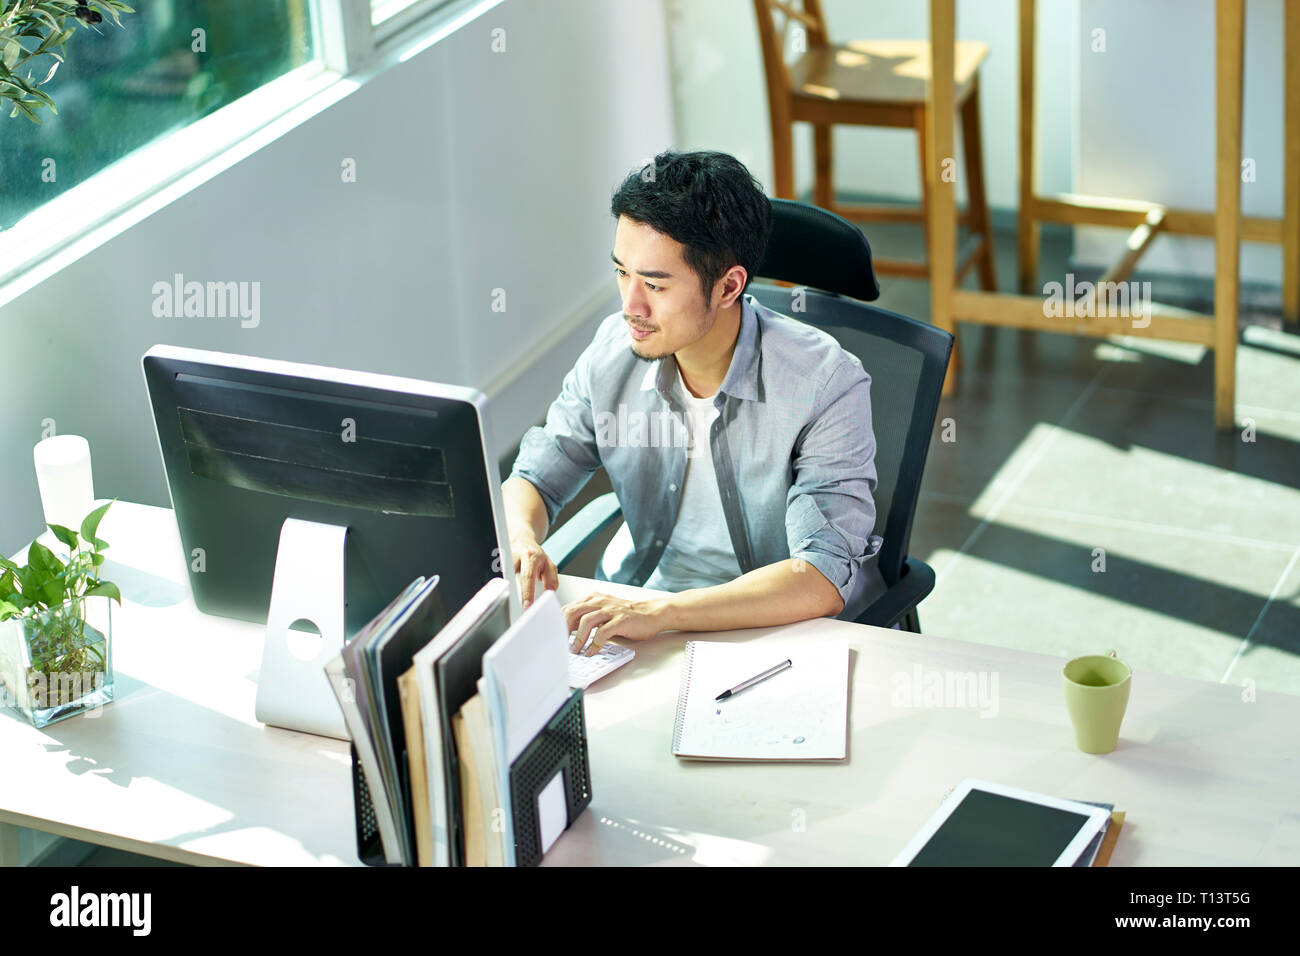 high angle view of young asian business person working in office using desktop computer Stock Photo